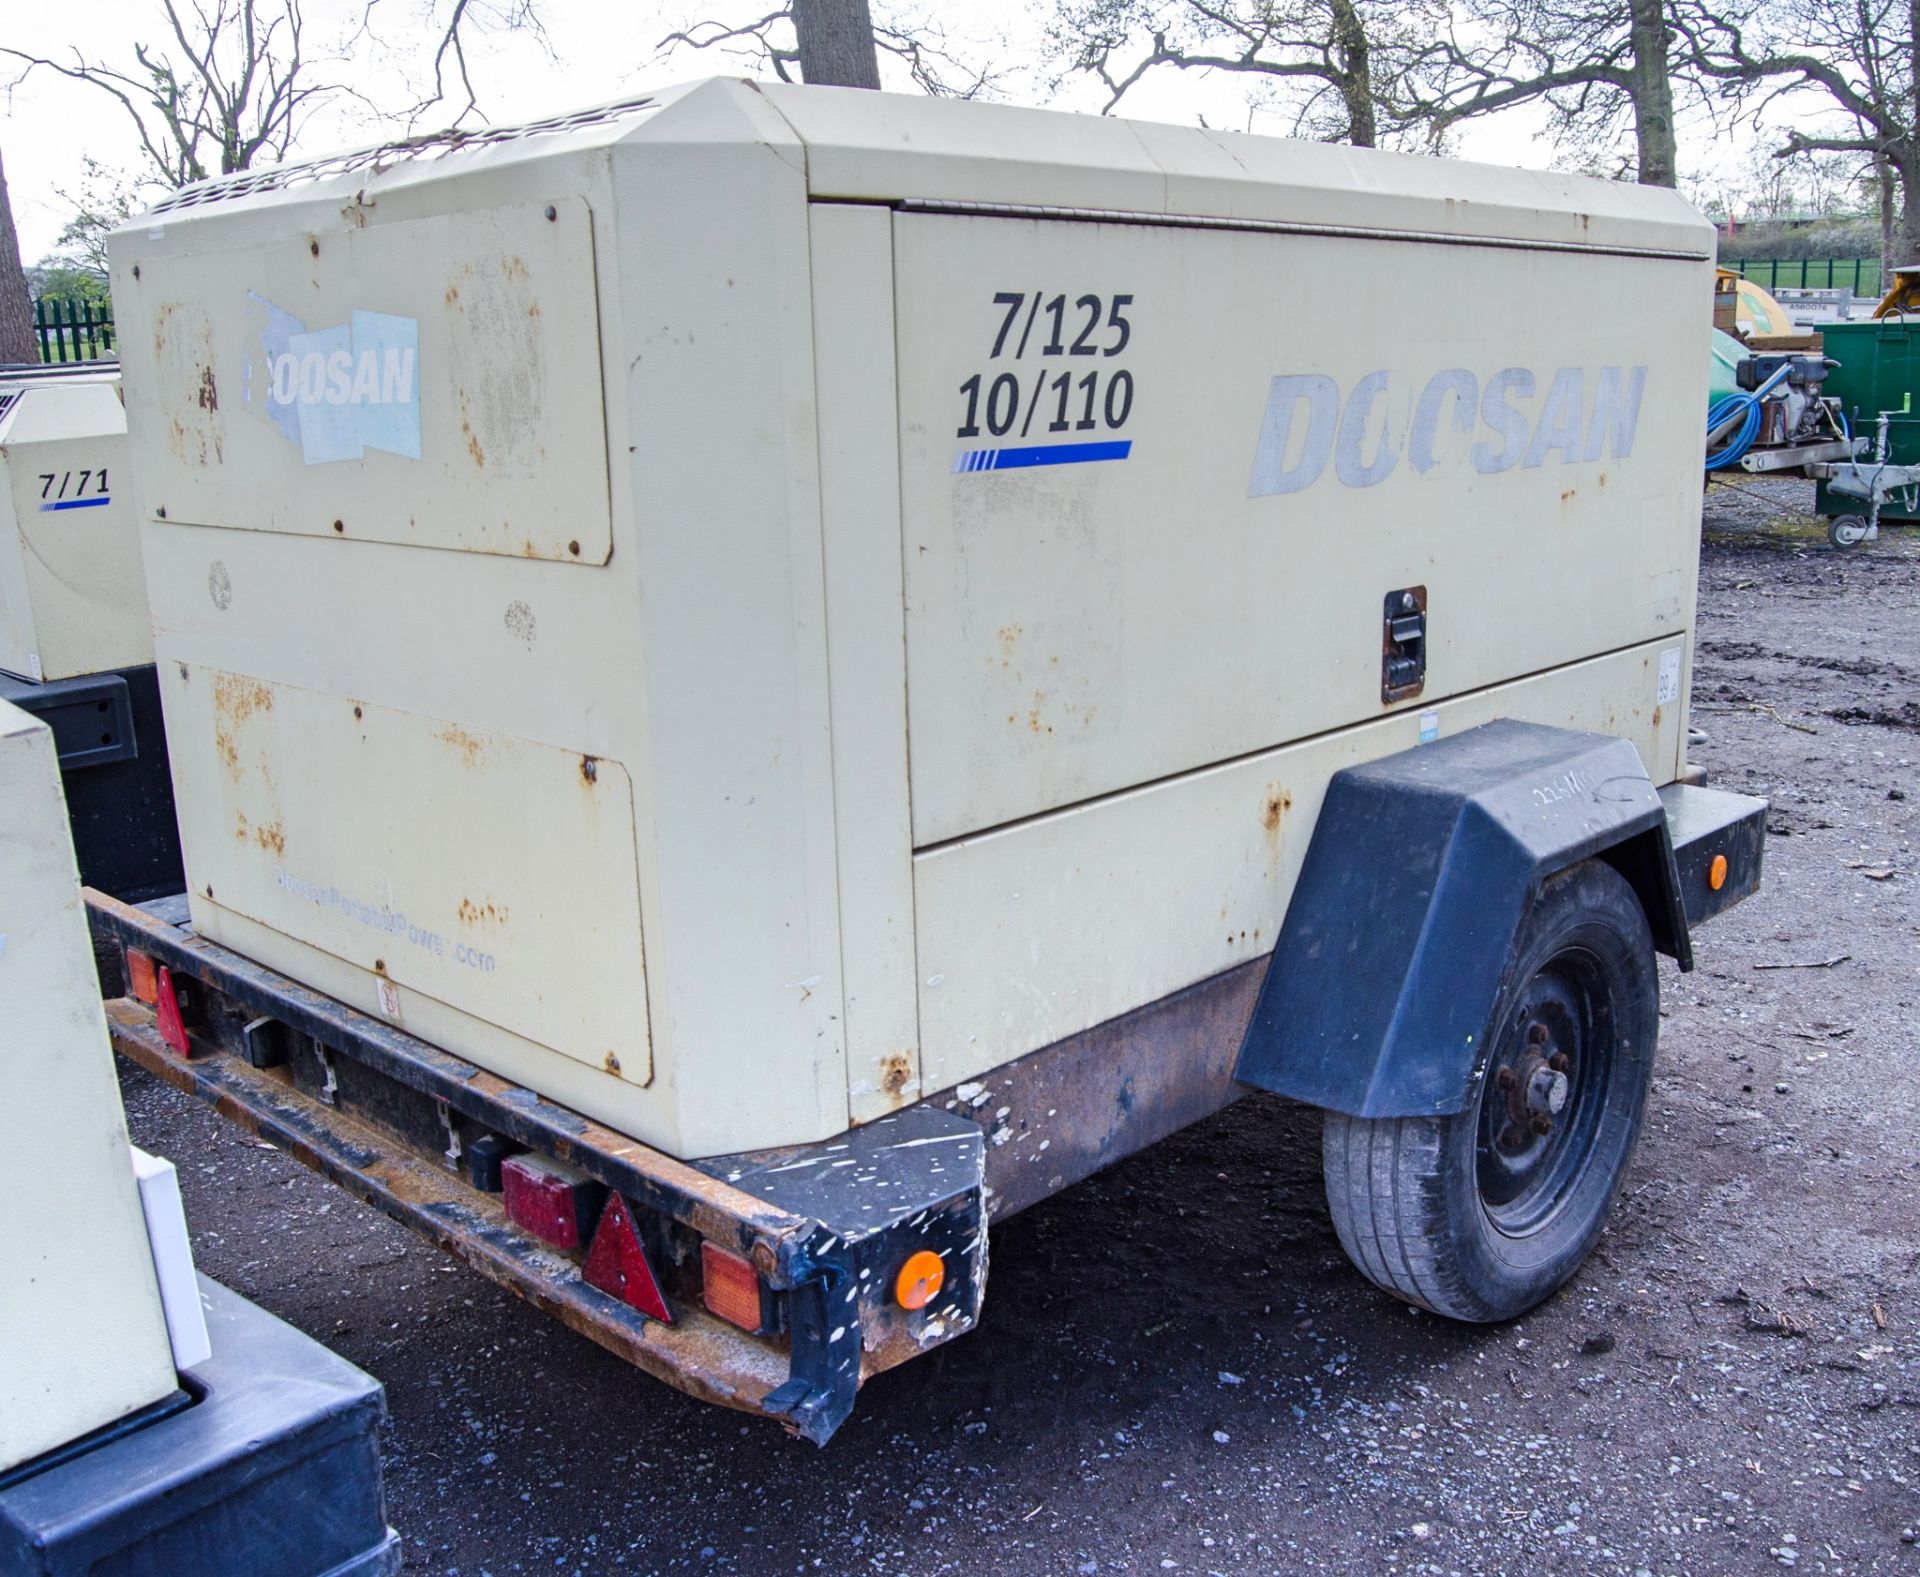 Doosan 7/125 10/110 diesel driven fast tow mobile air compressor Year: 2014 S/N: 660010 Recorded - Image 2 of 6